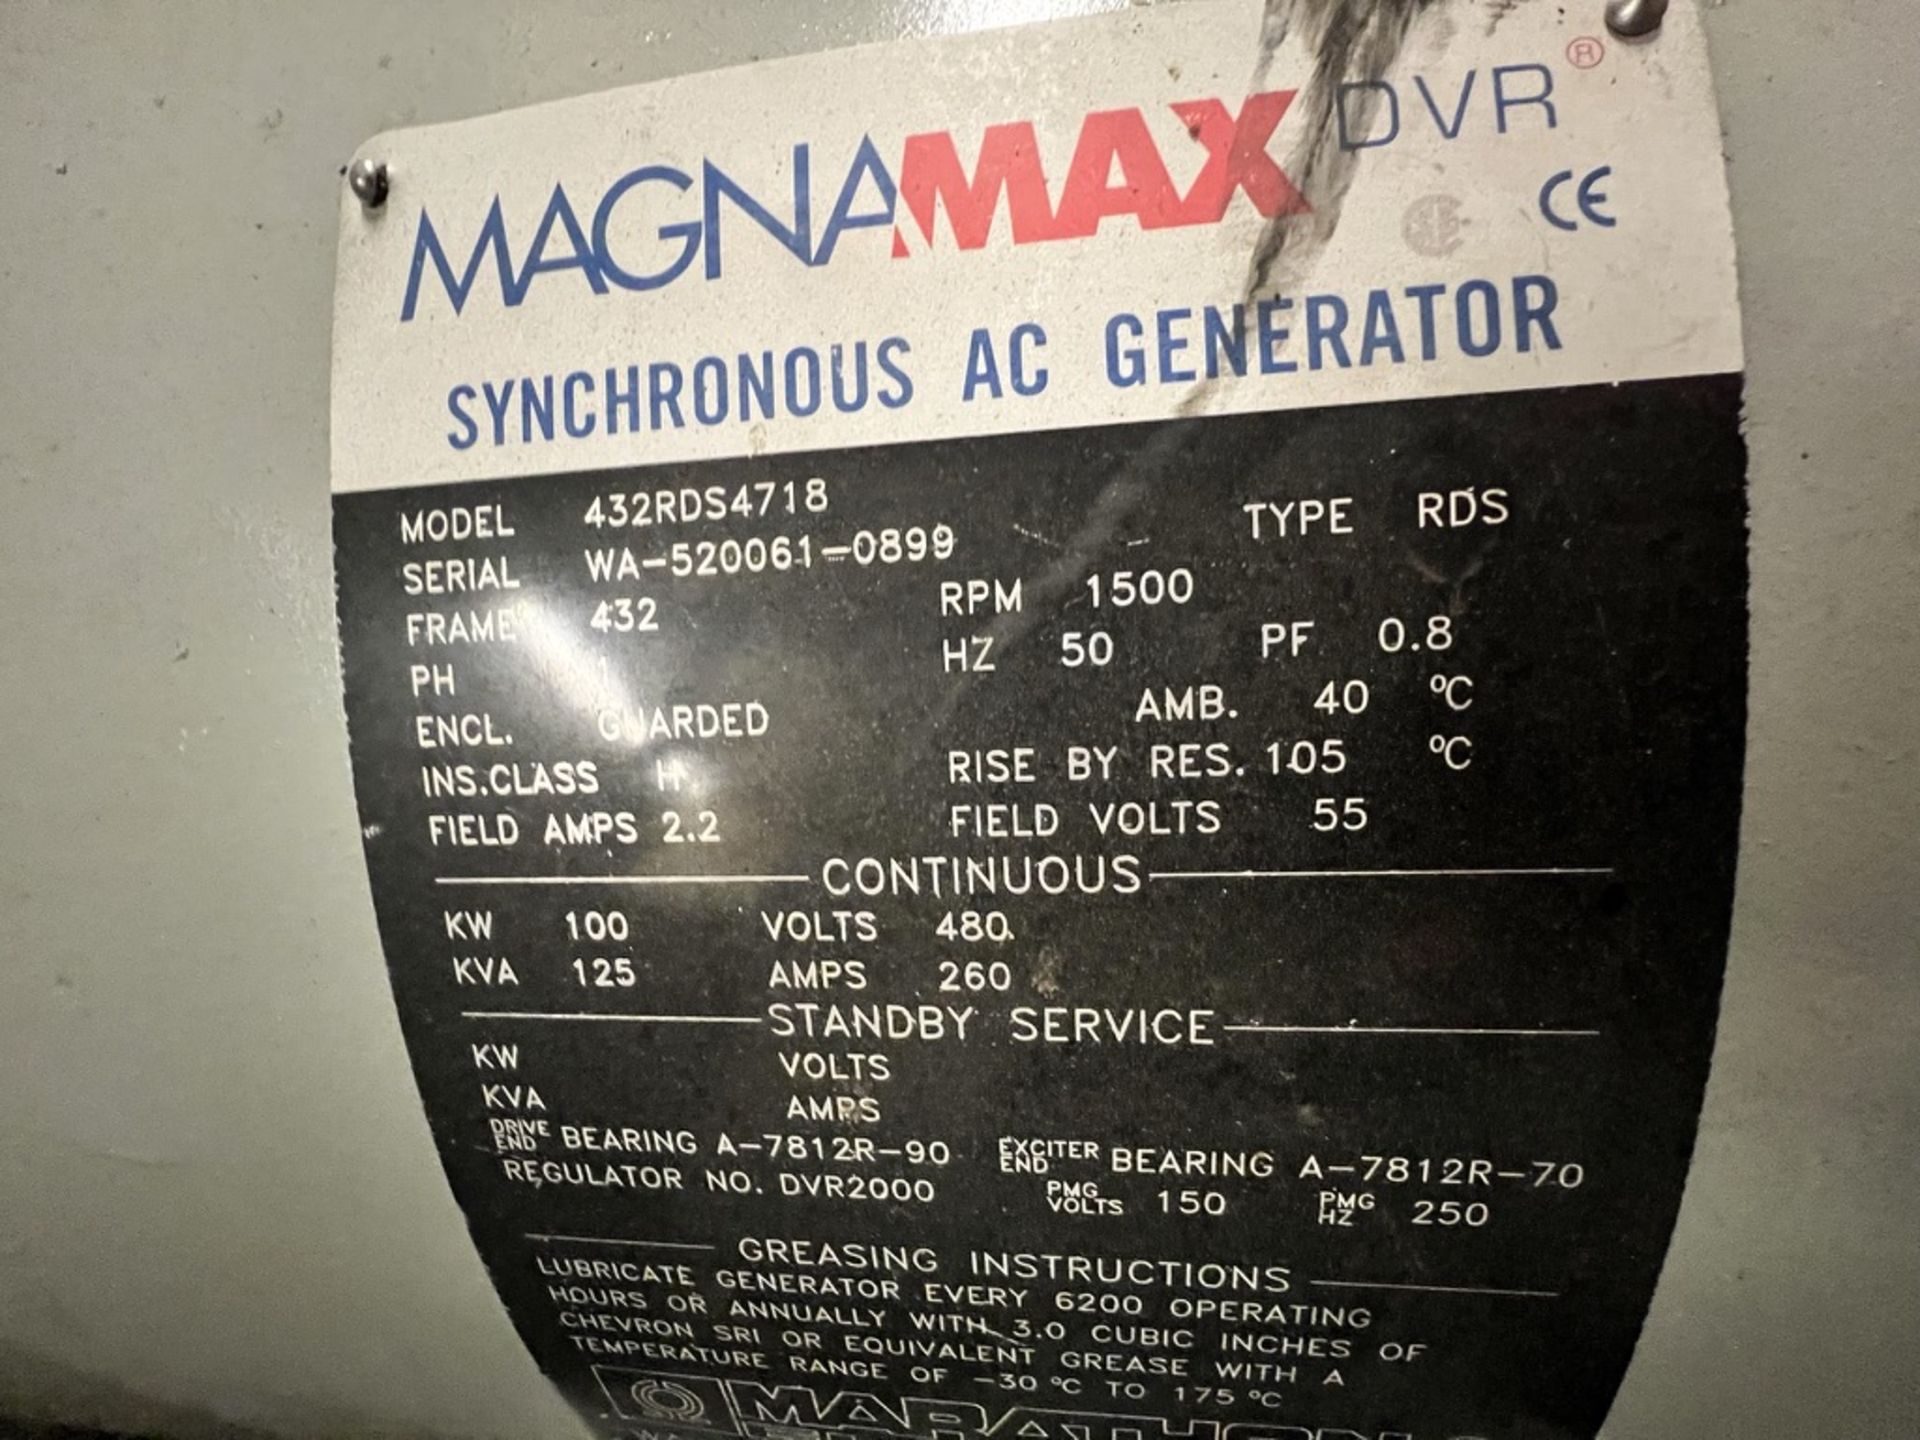 MAGNAMAX SYCHRONOUS AC GENERATOR, MODEL 432RDS4718, S/N WA-520061-0899, 50 HZ, 1500 RPM, 100 KW, 125 - Image 12 of 17